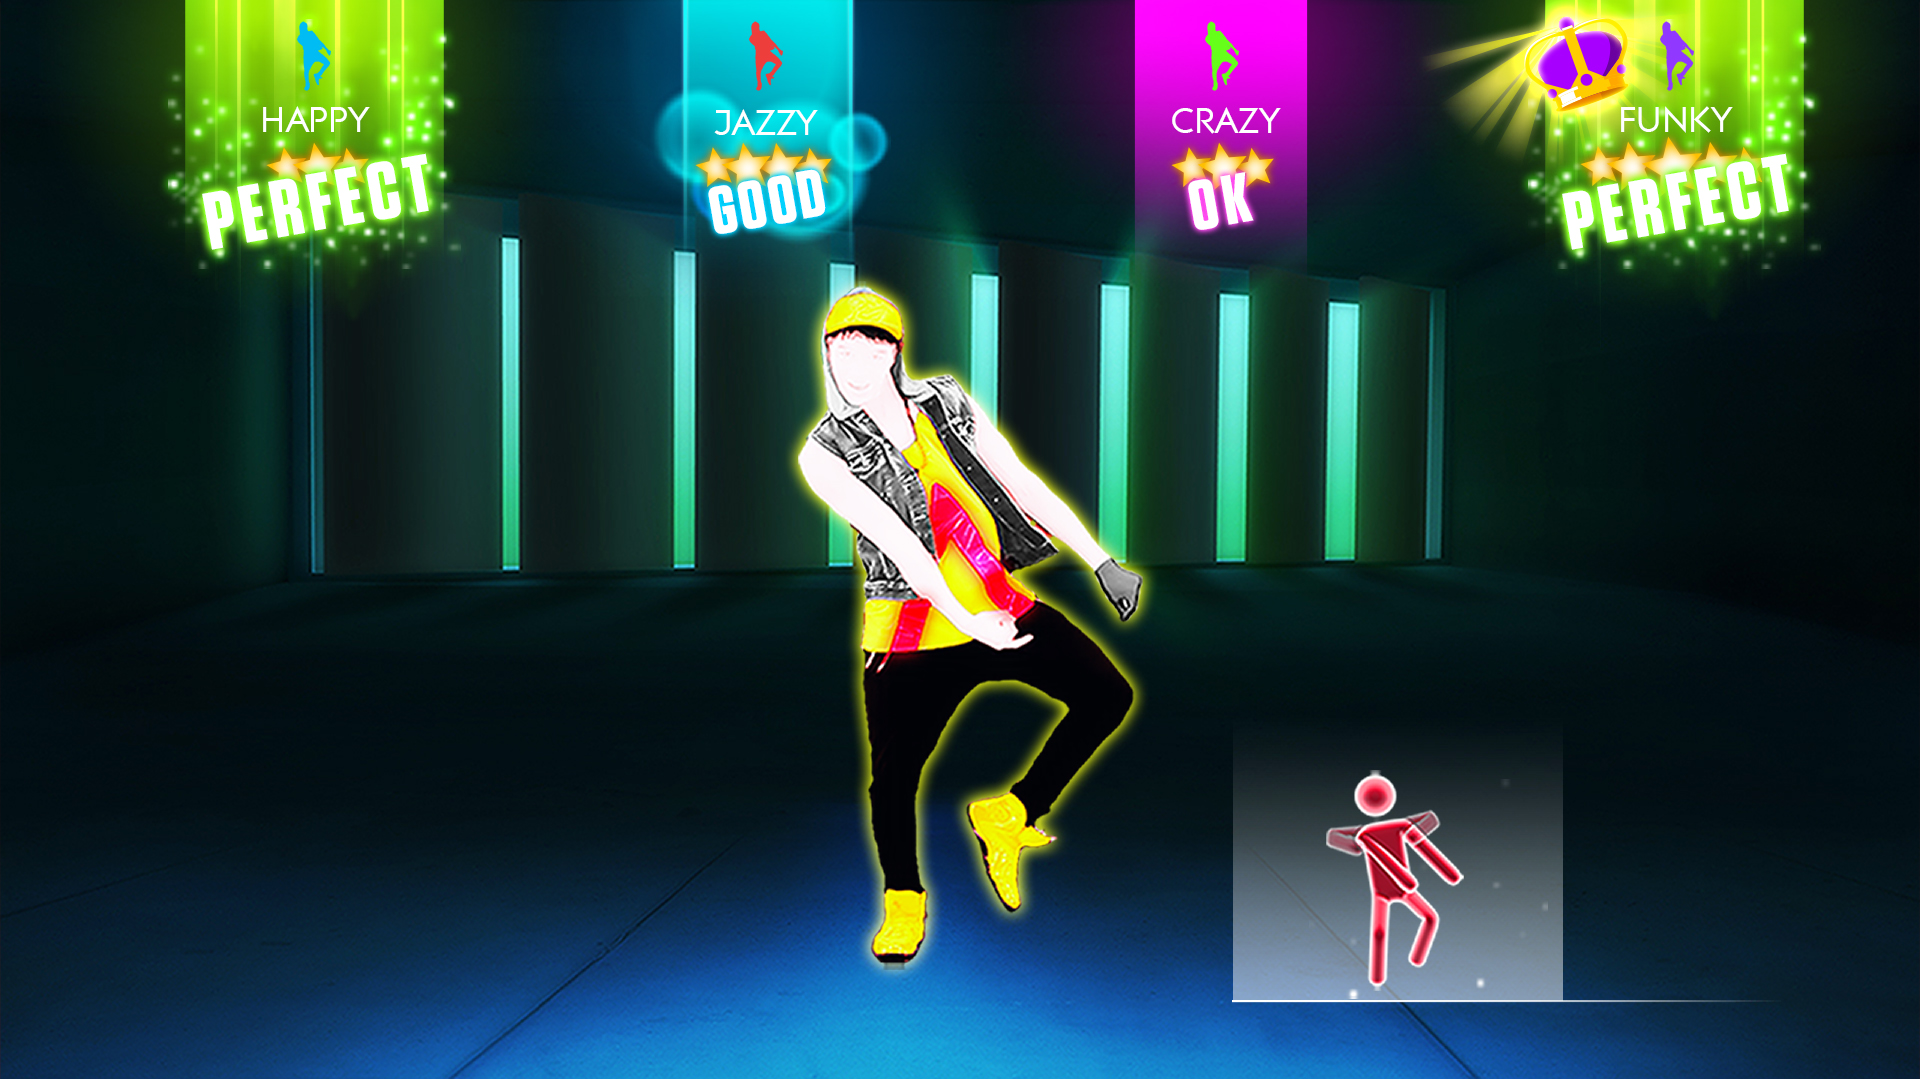 how to get wii points for just dance 2014